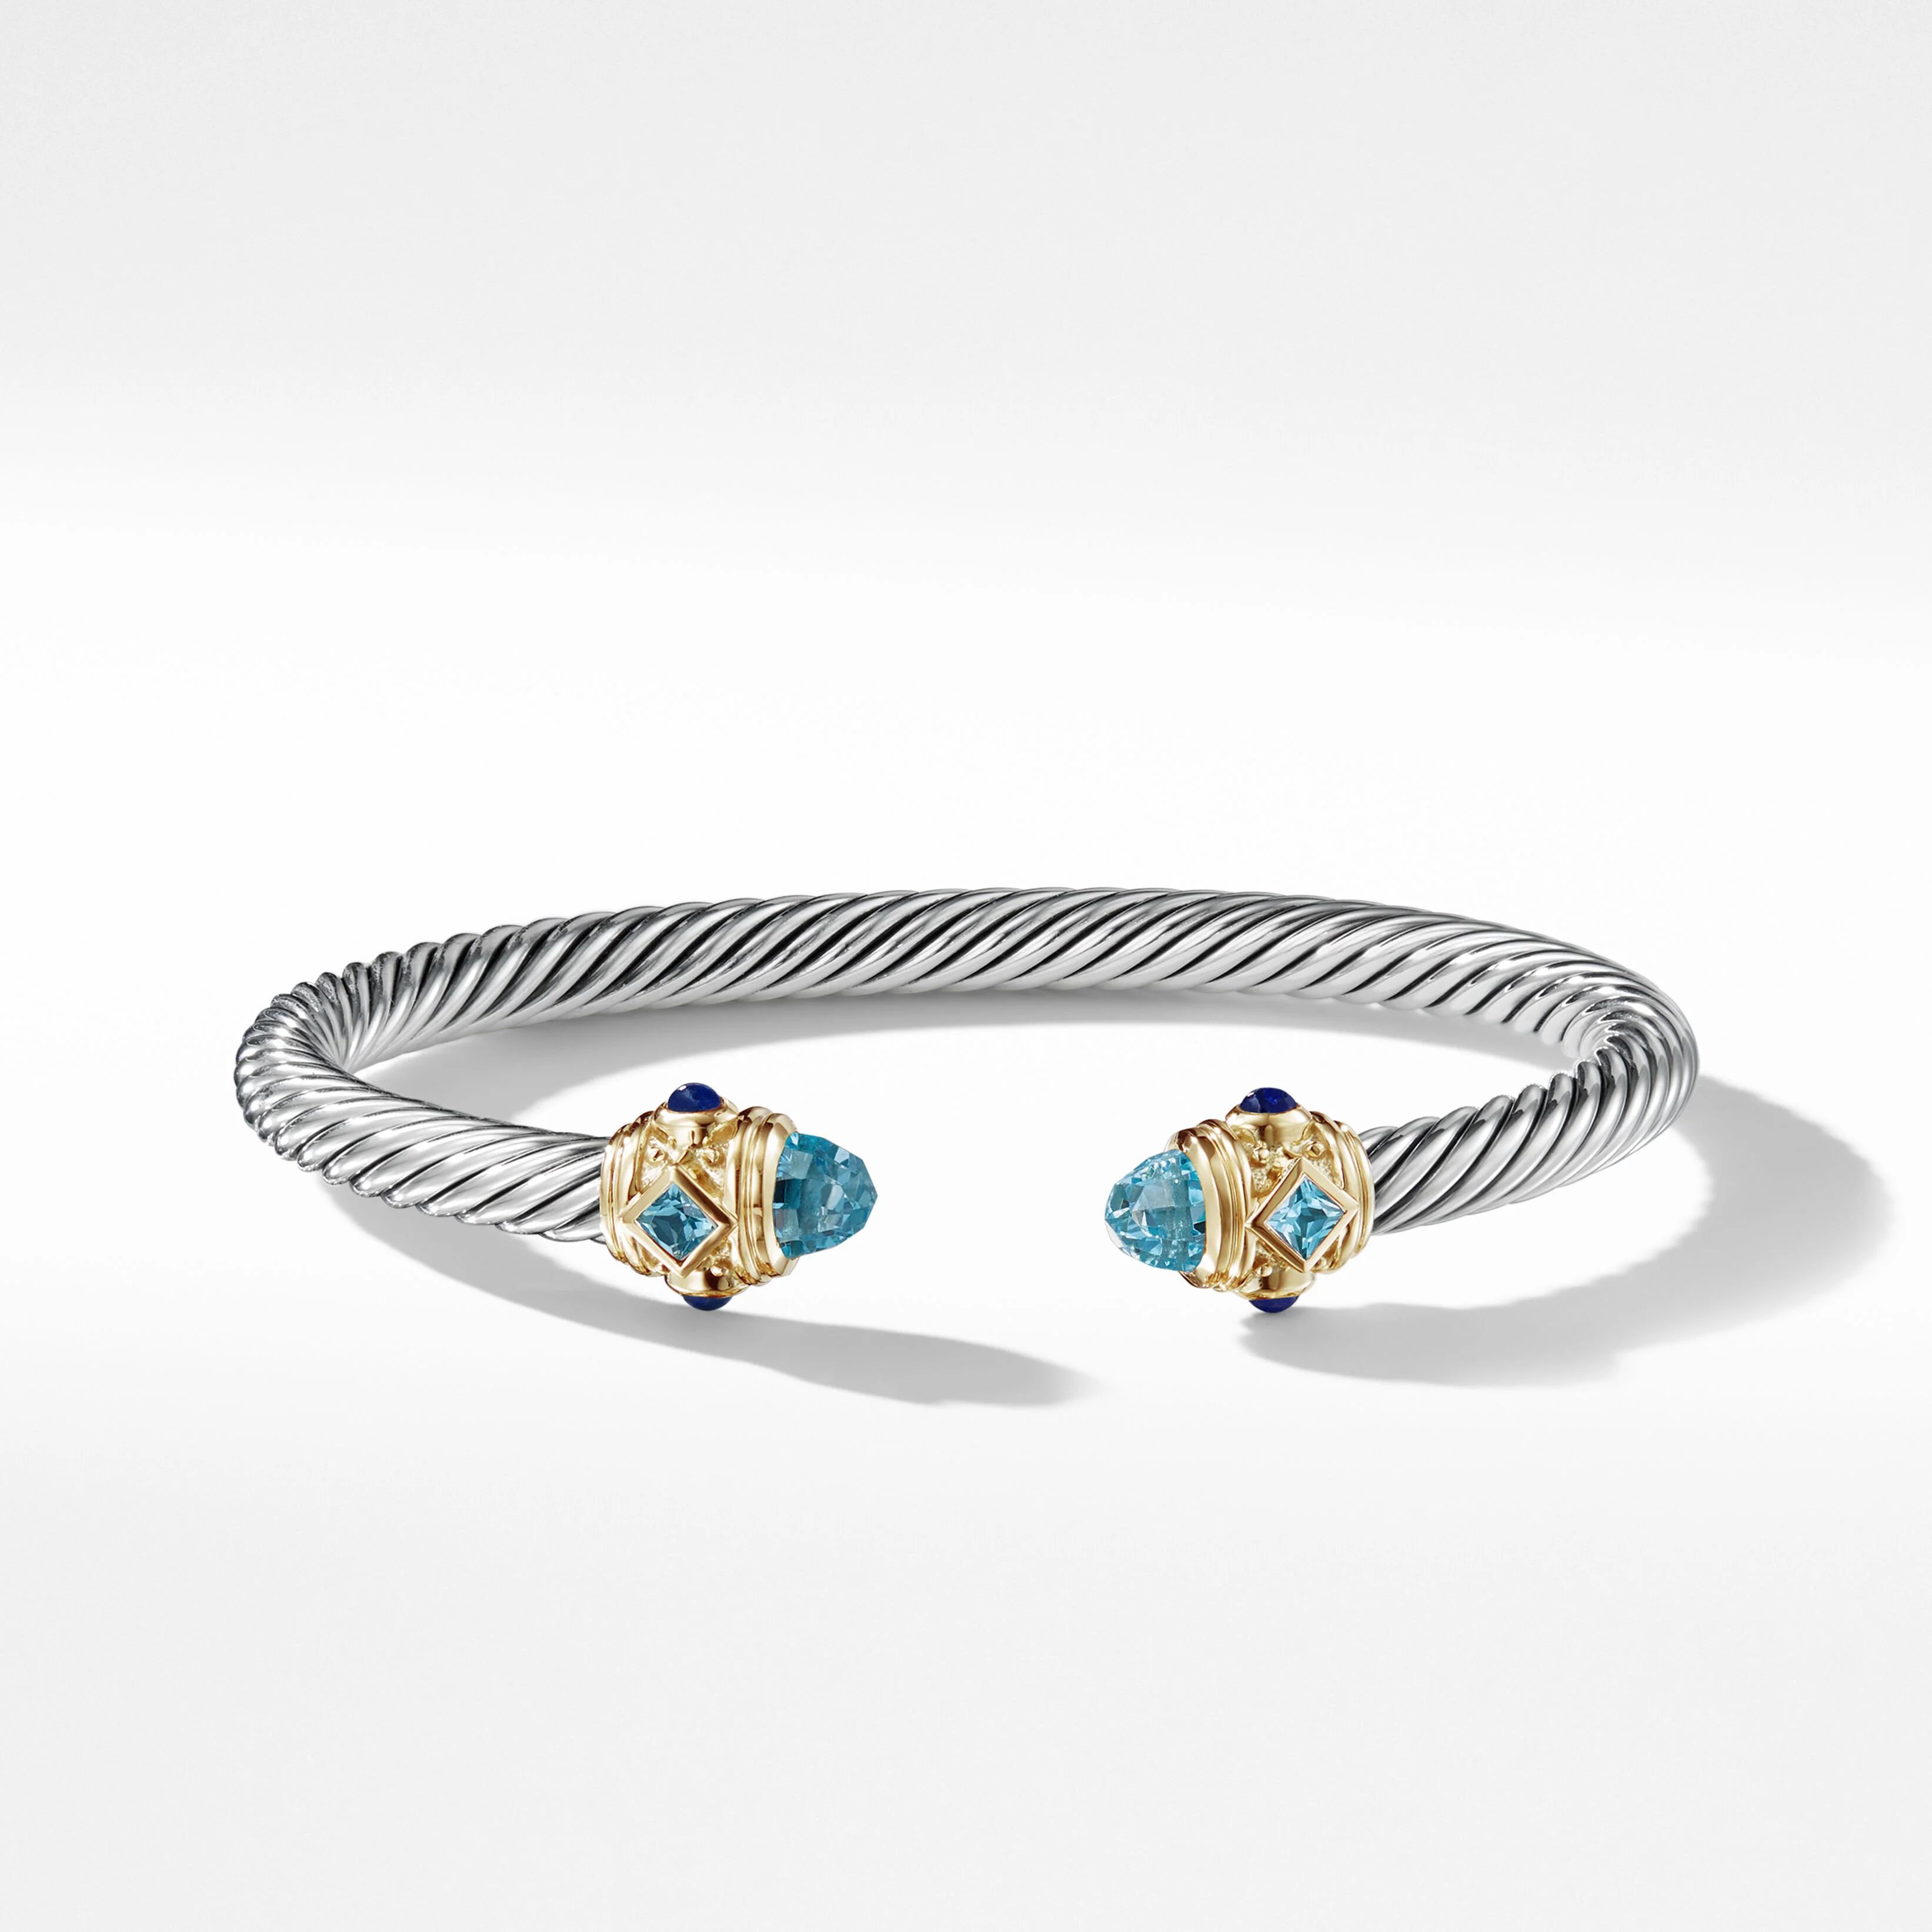 Renaissance® Bracelet in Sterling Silver with Blue Topaz, Lapis and 14K Yellow Gold | David Yurman